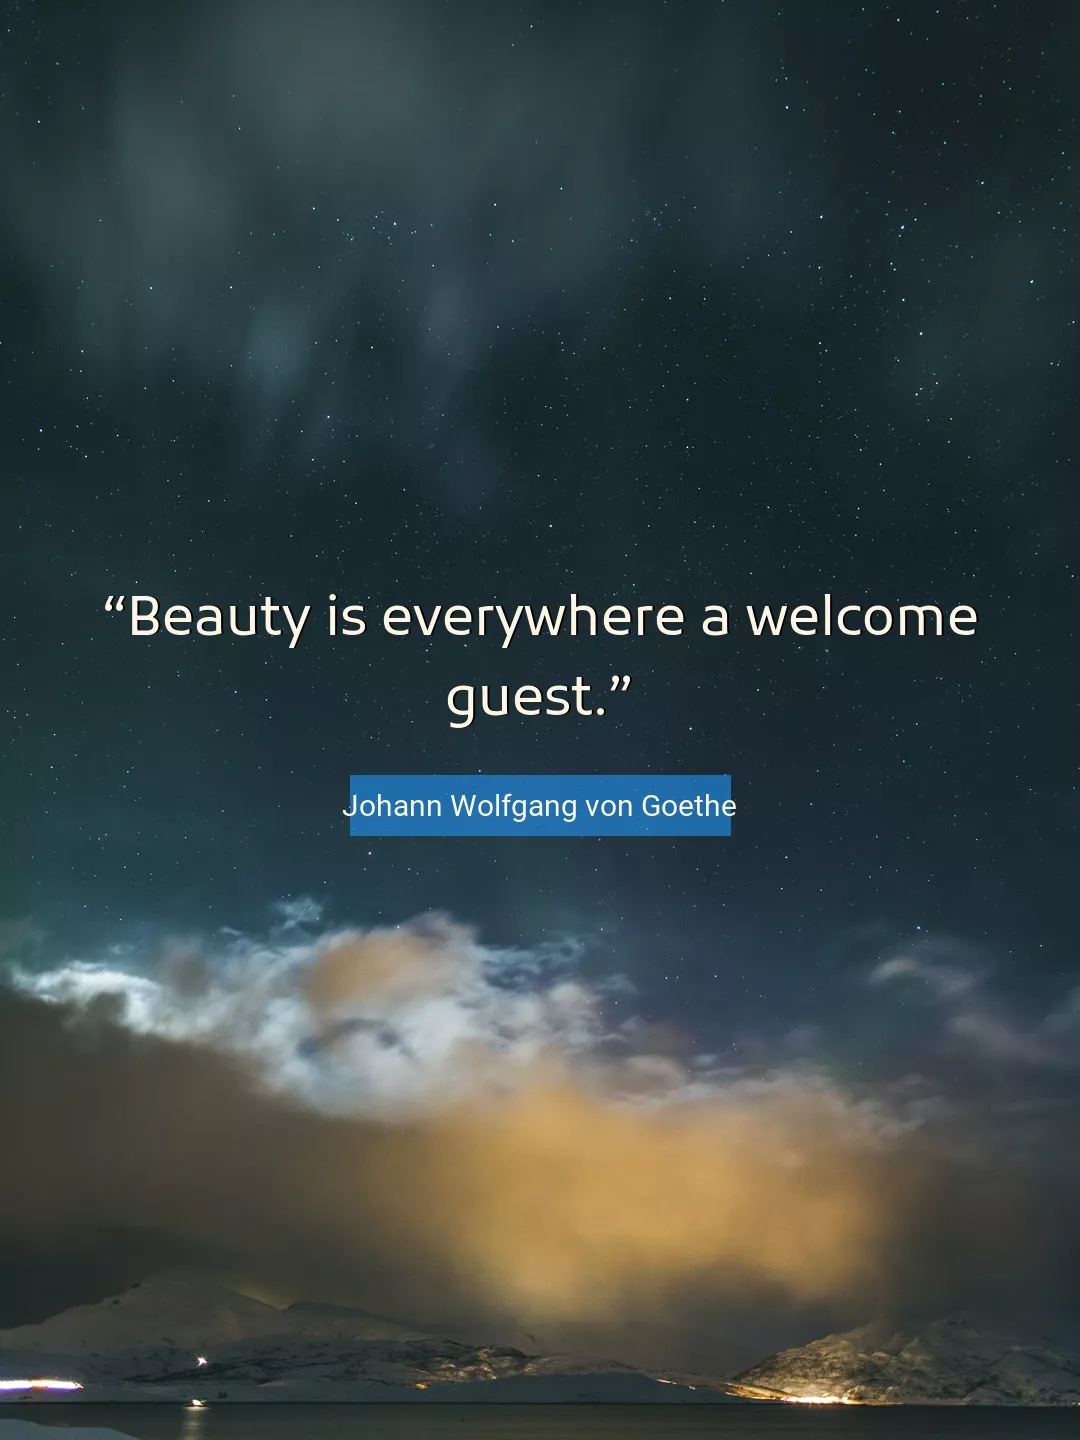 Quote About Beauty By Johann Wolfgang von Goethe